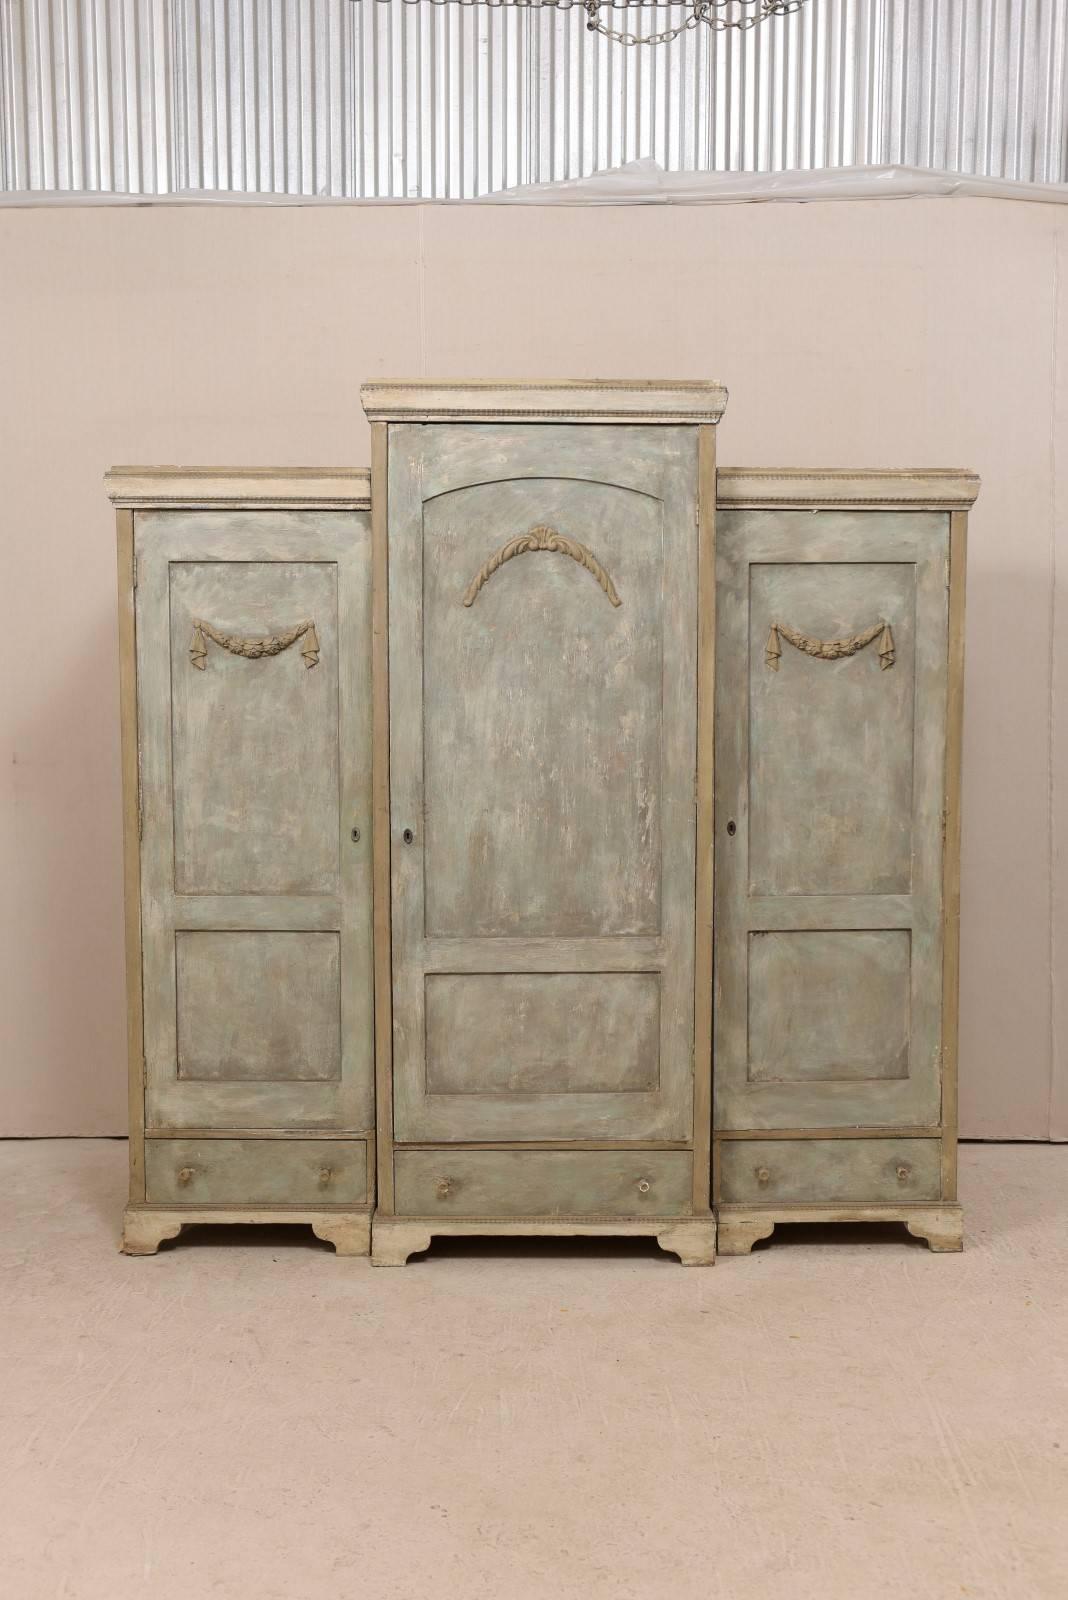 A Swedish breakfront three-door painted wood armoire from the 19th century. This antique Swedish storage cabinet features cabinets, each with a single door and bottom drawer. The three doors are each adorn with swagged appliques. The centre section